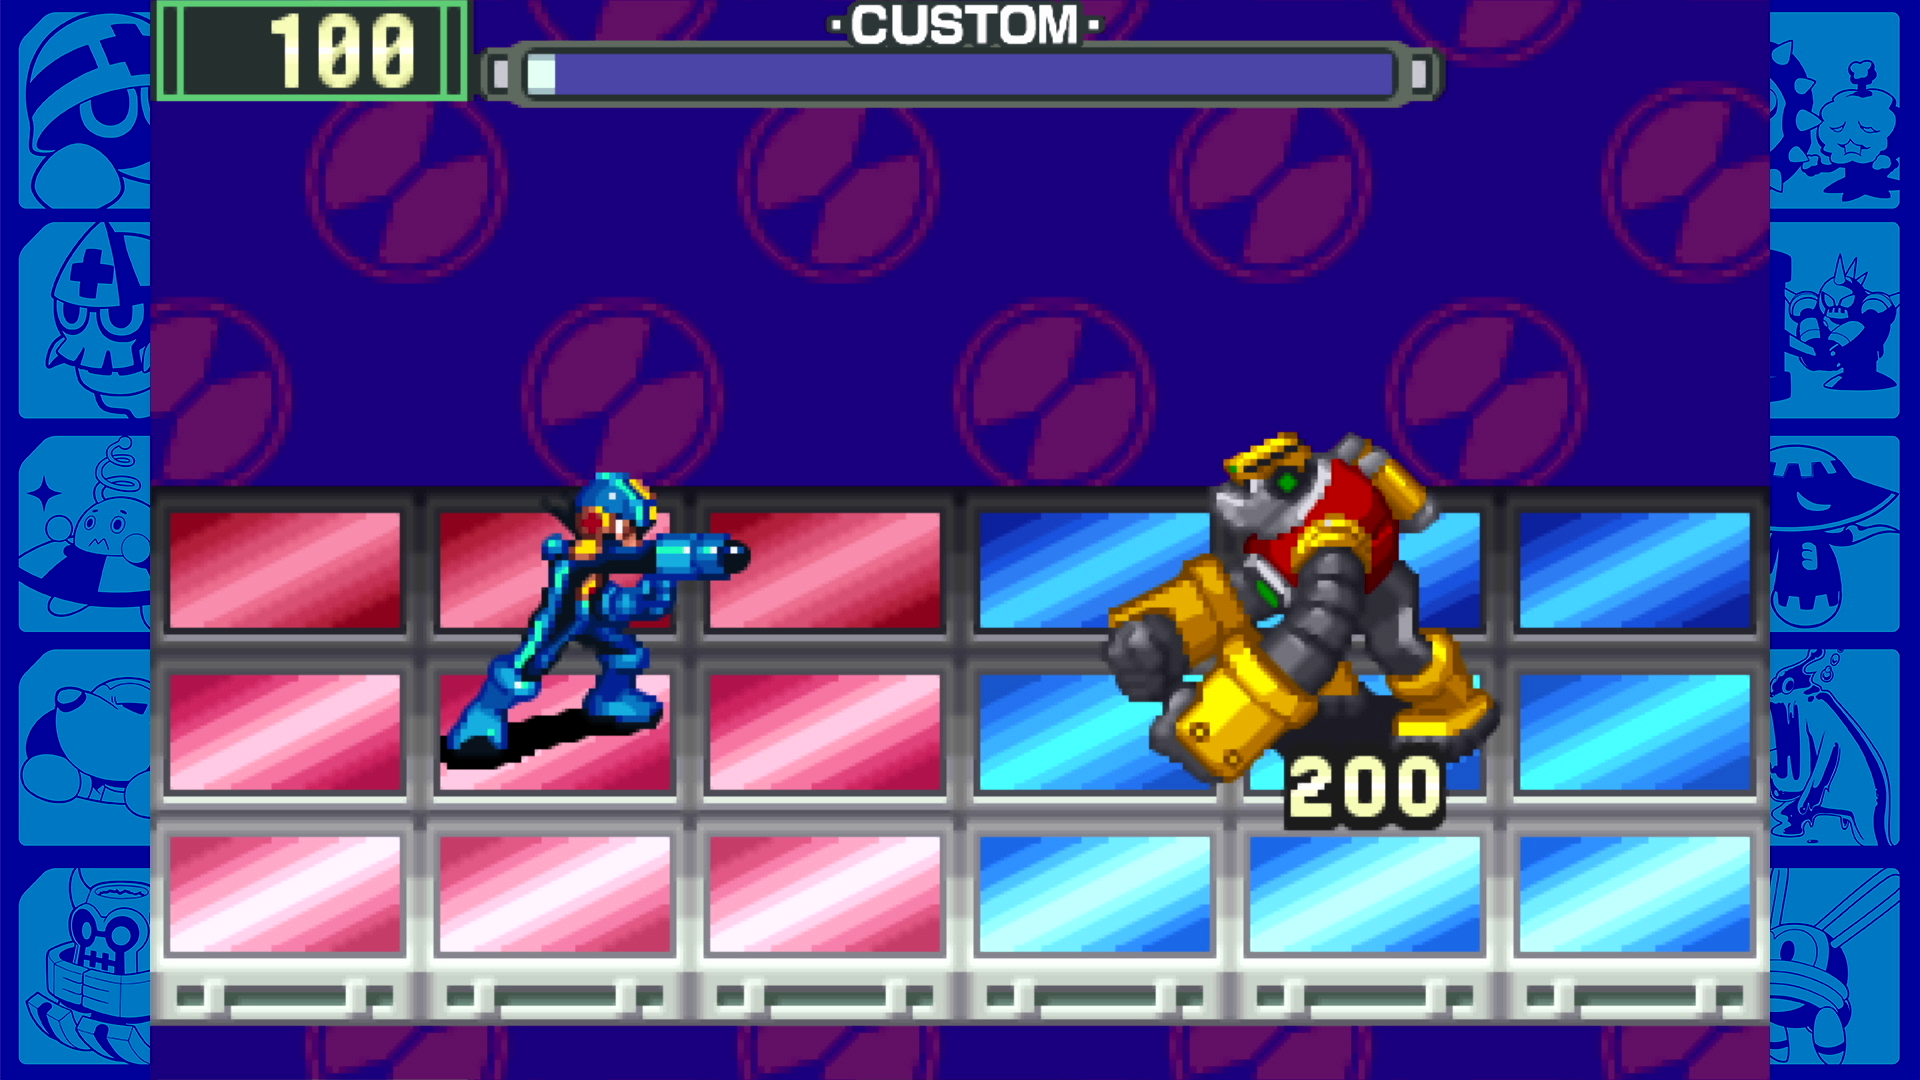 A screenshot from Megaman Battle Collection. Megaman is standing on red titles, fighting a monster standing on blue tiles.